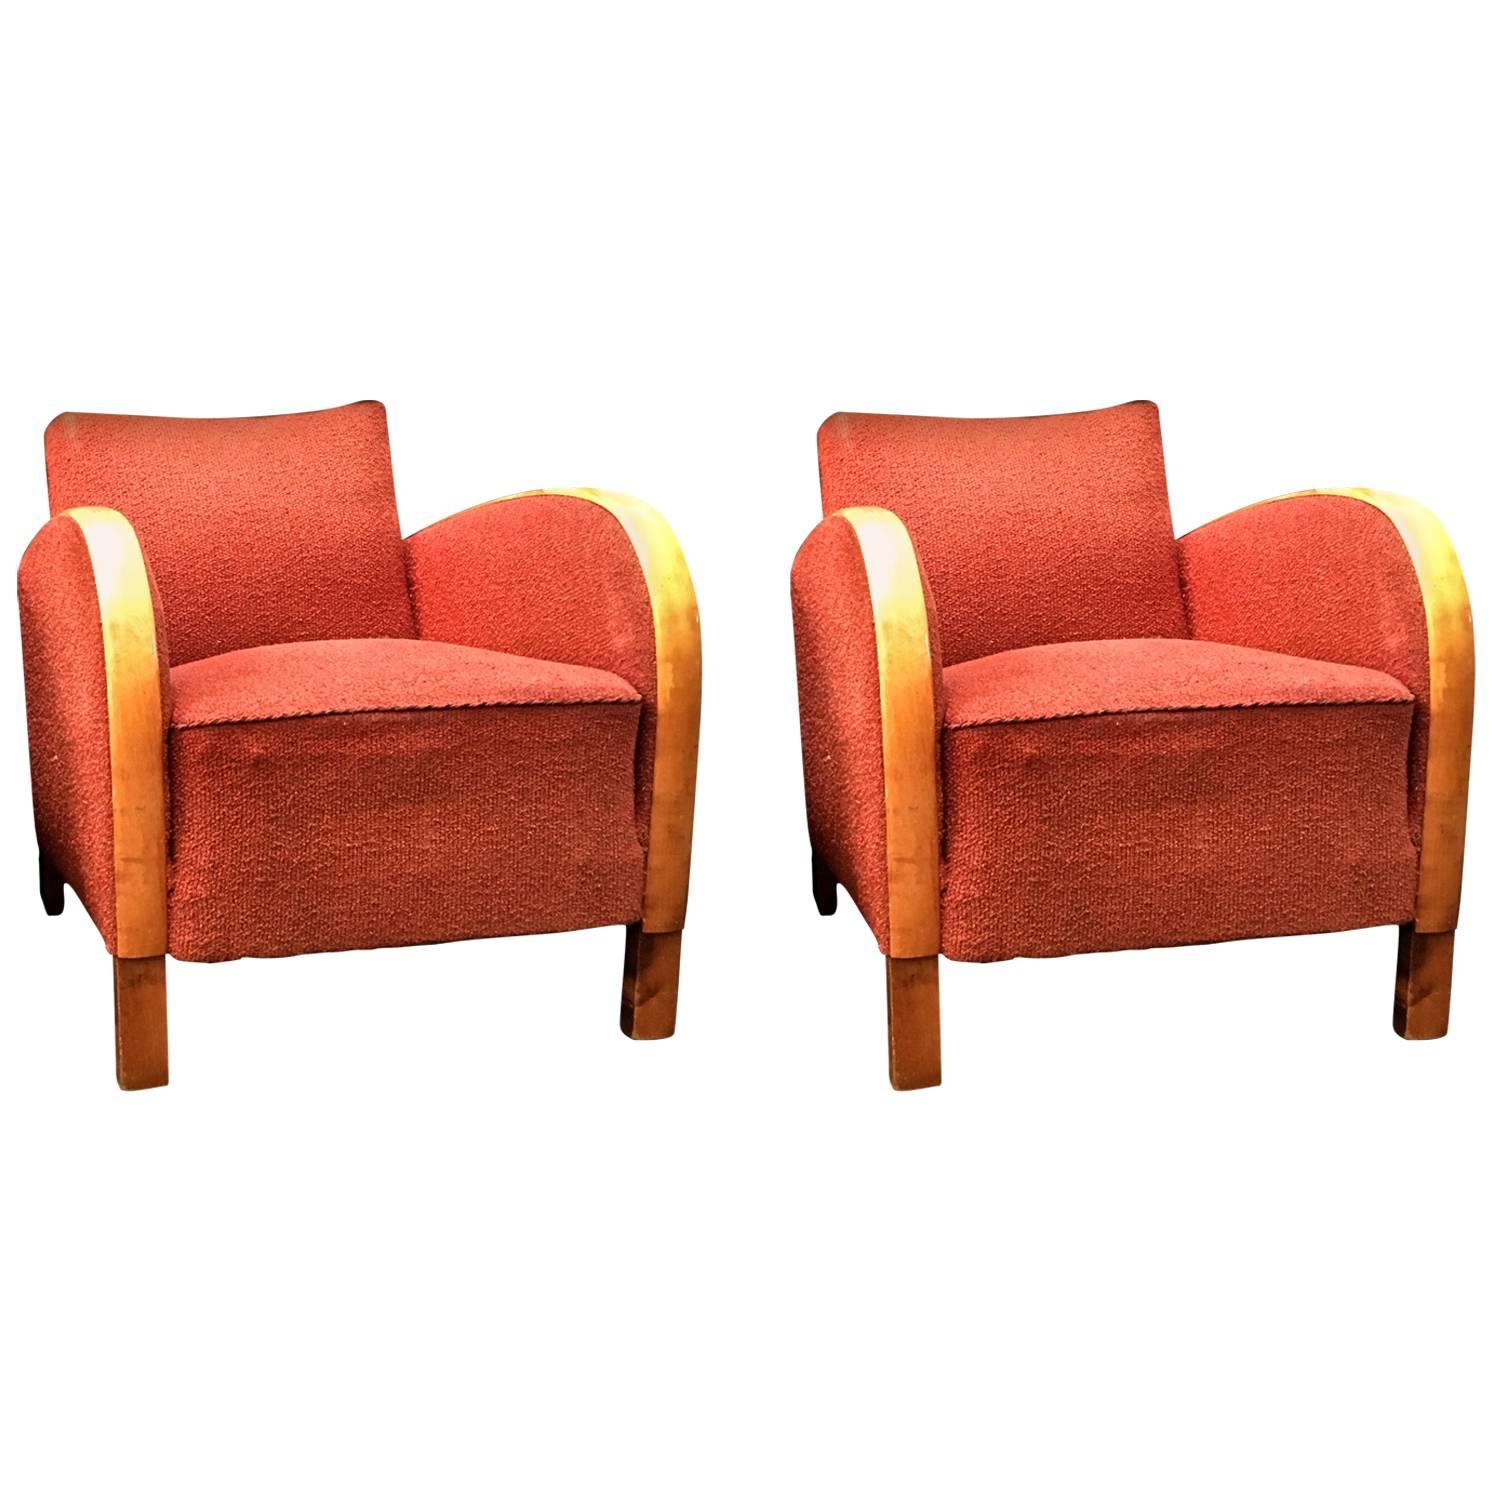 Art Deco Swedish Armchairs Early 20th Century Golden Birch Bentwood Arms